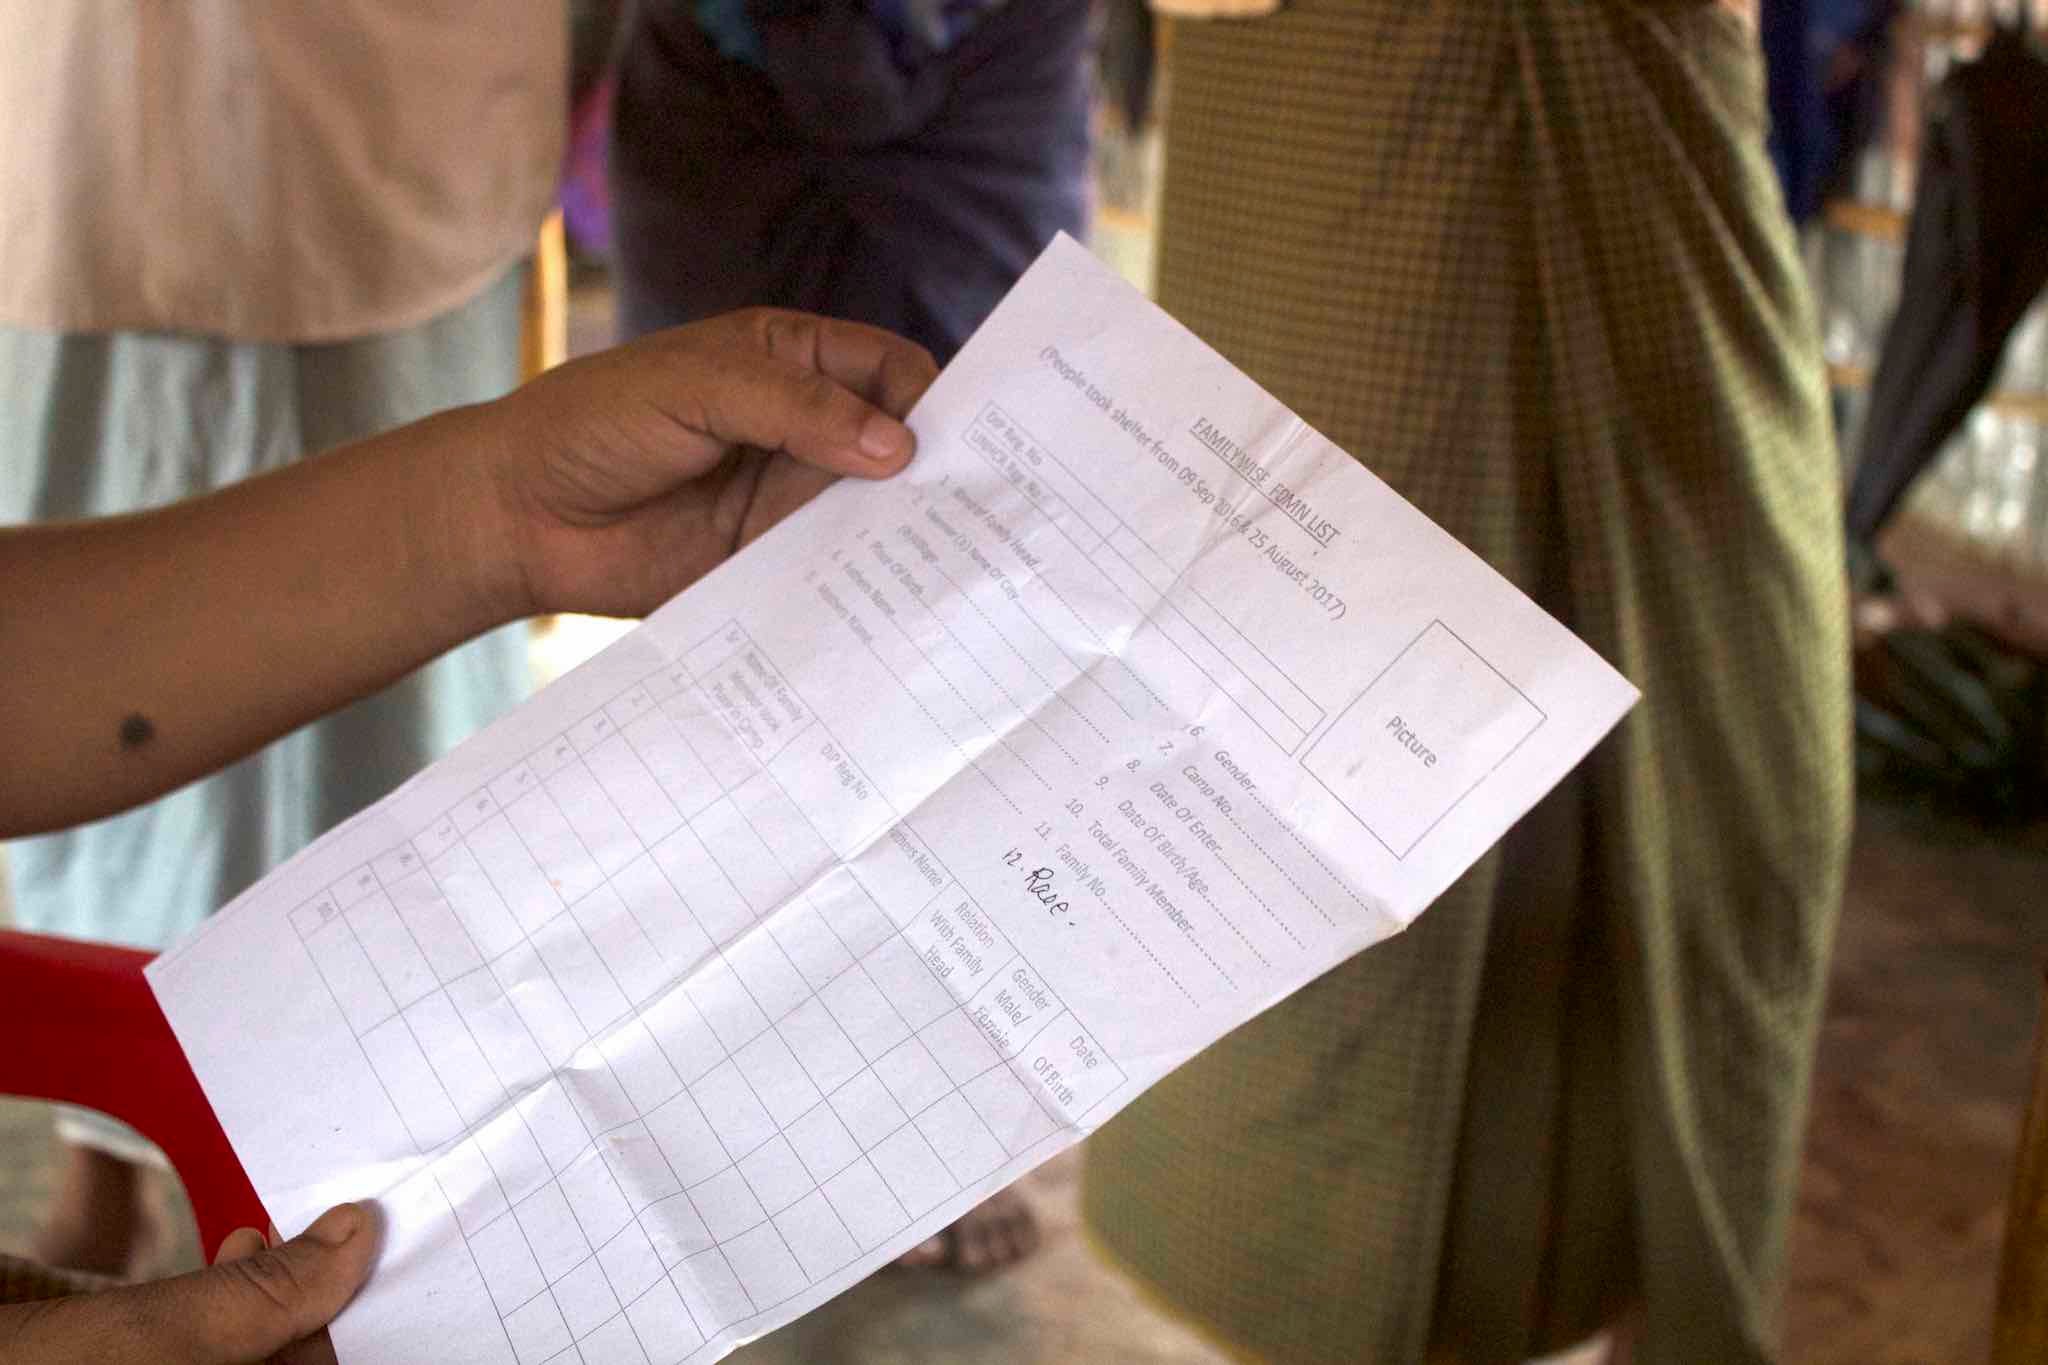 Camp authorities have been forcing Rohingya to fill out family counting forms in recent weeks. Many see it as preparations for repatriation